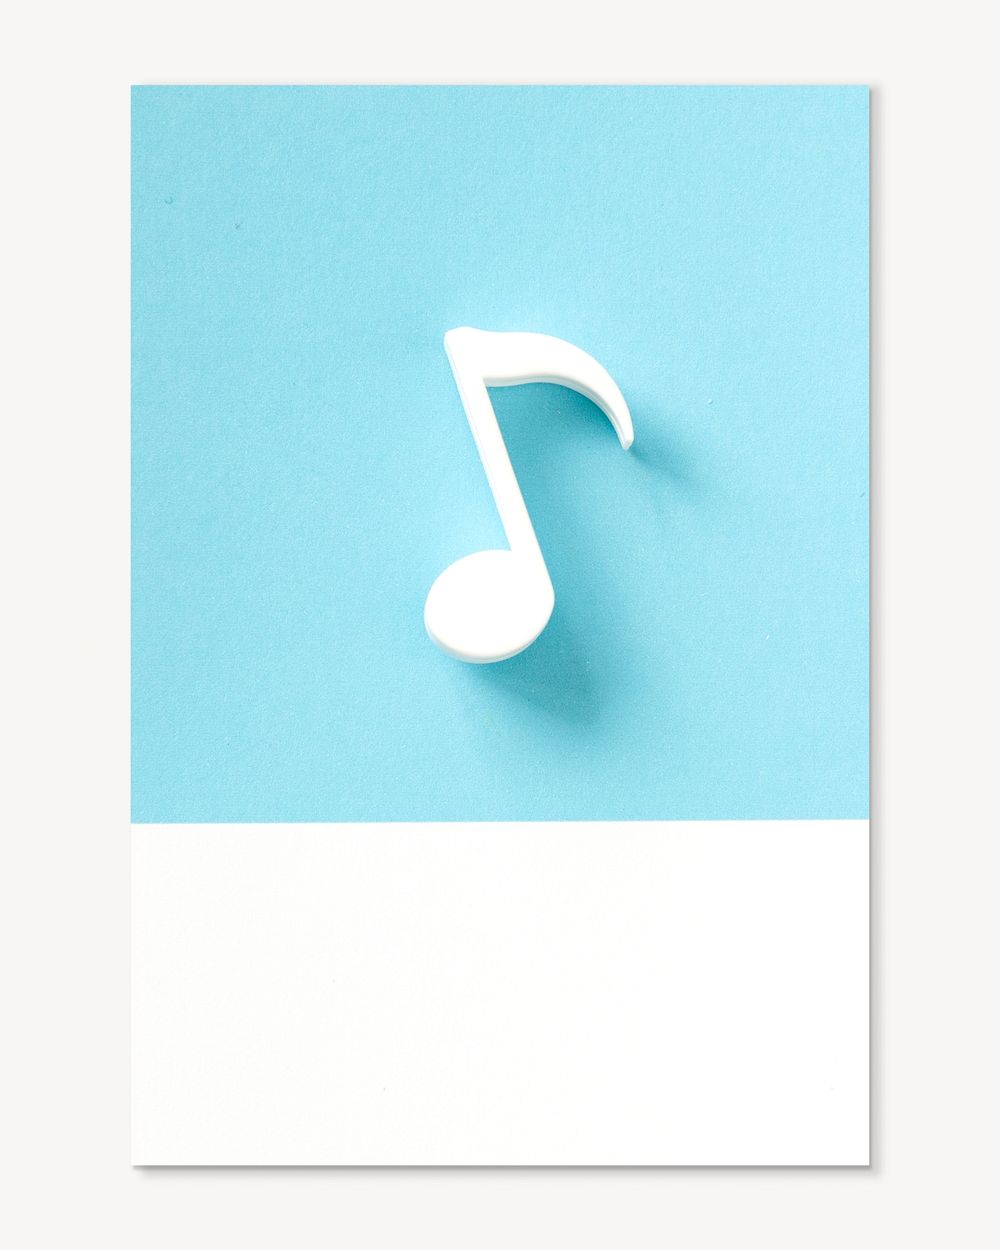 Musical note image on white